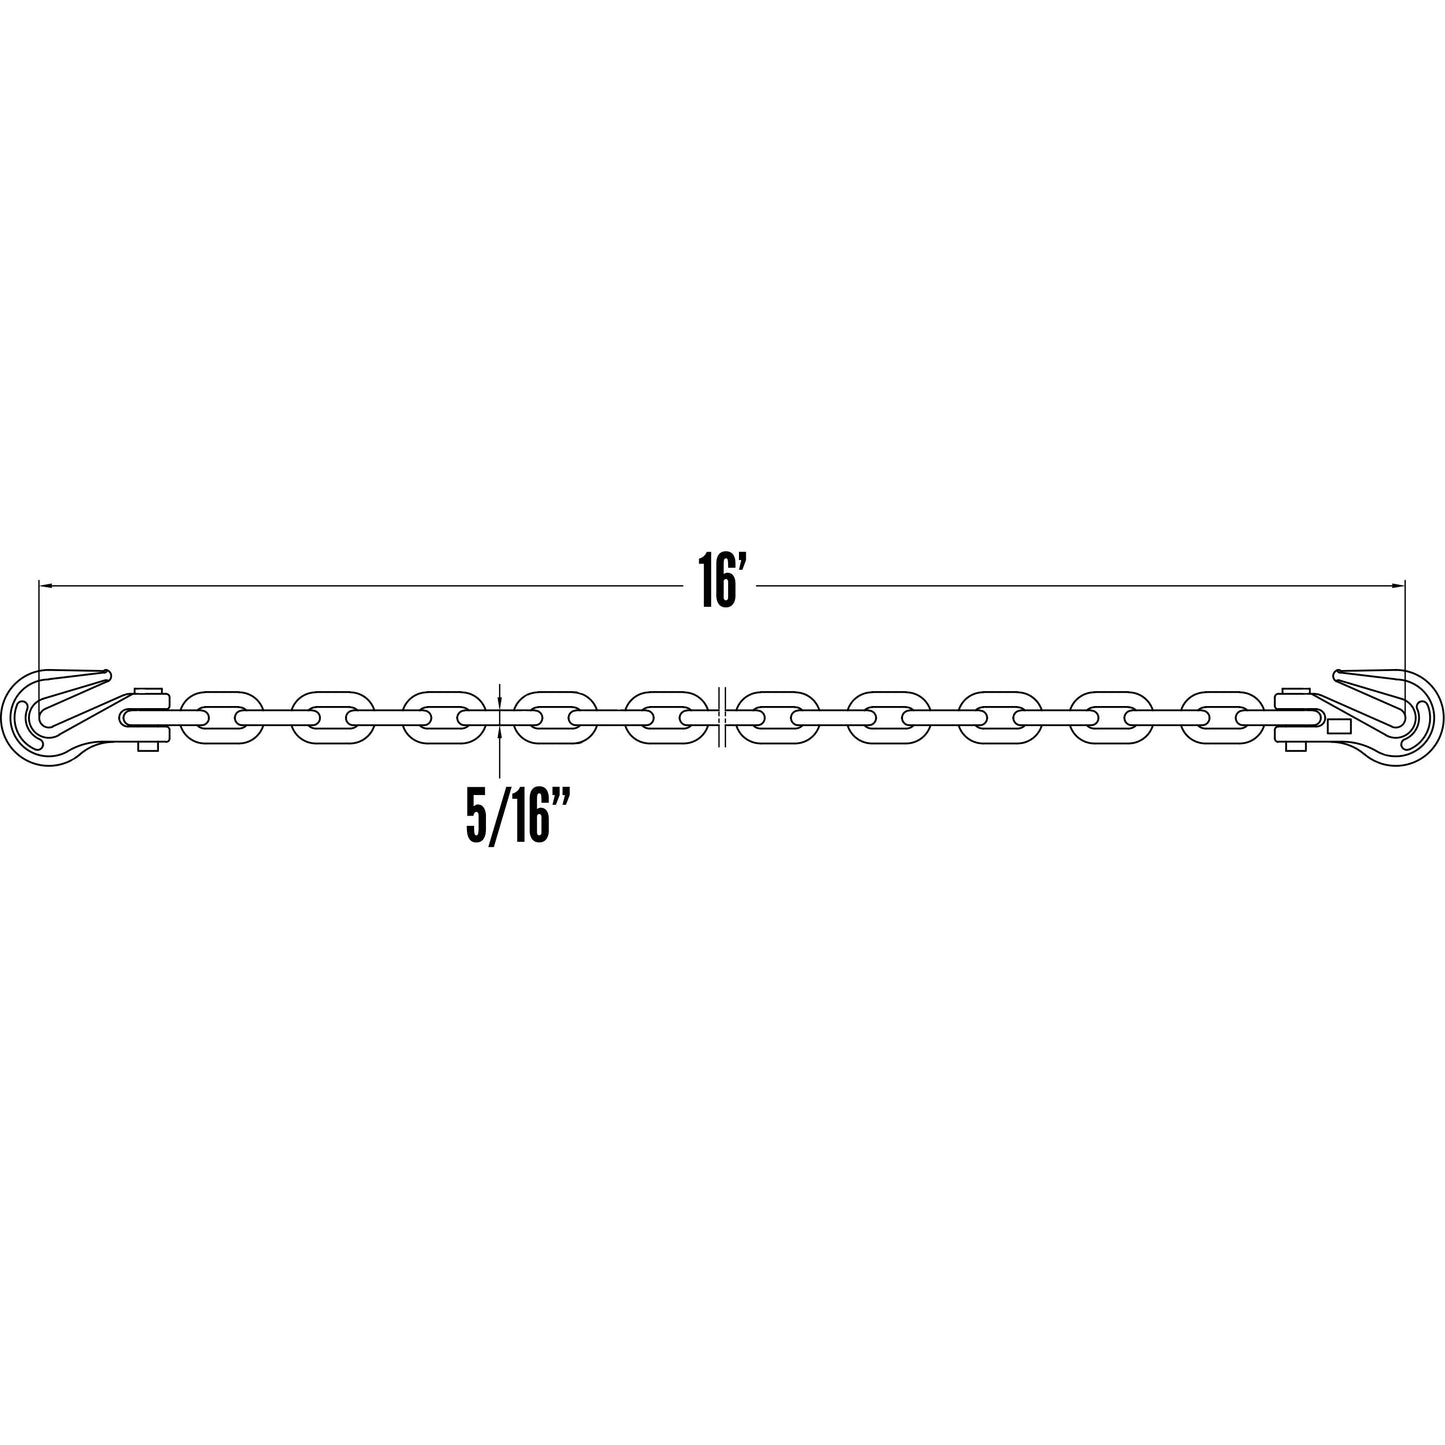 516 inch x 16 foot CM Transport Chain Grade 70 image 4 of 7